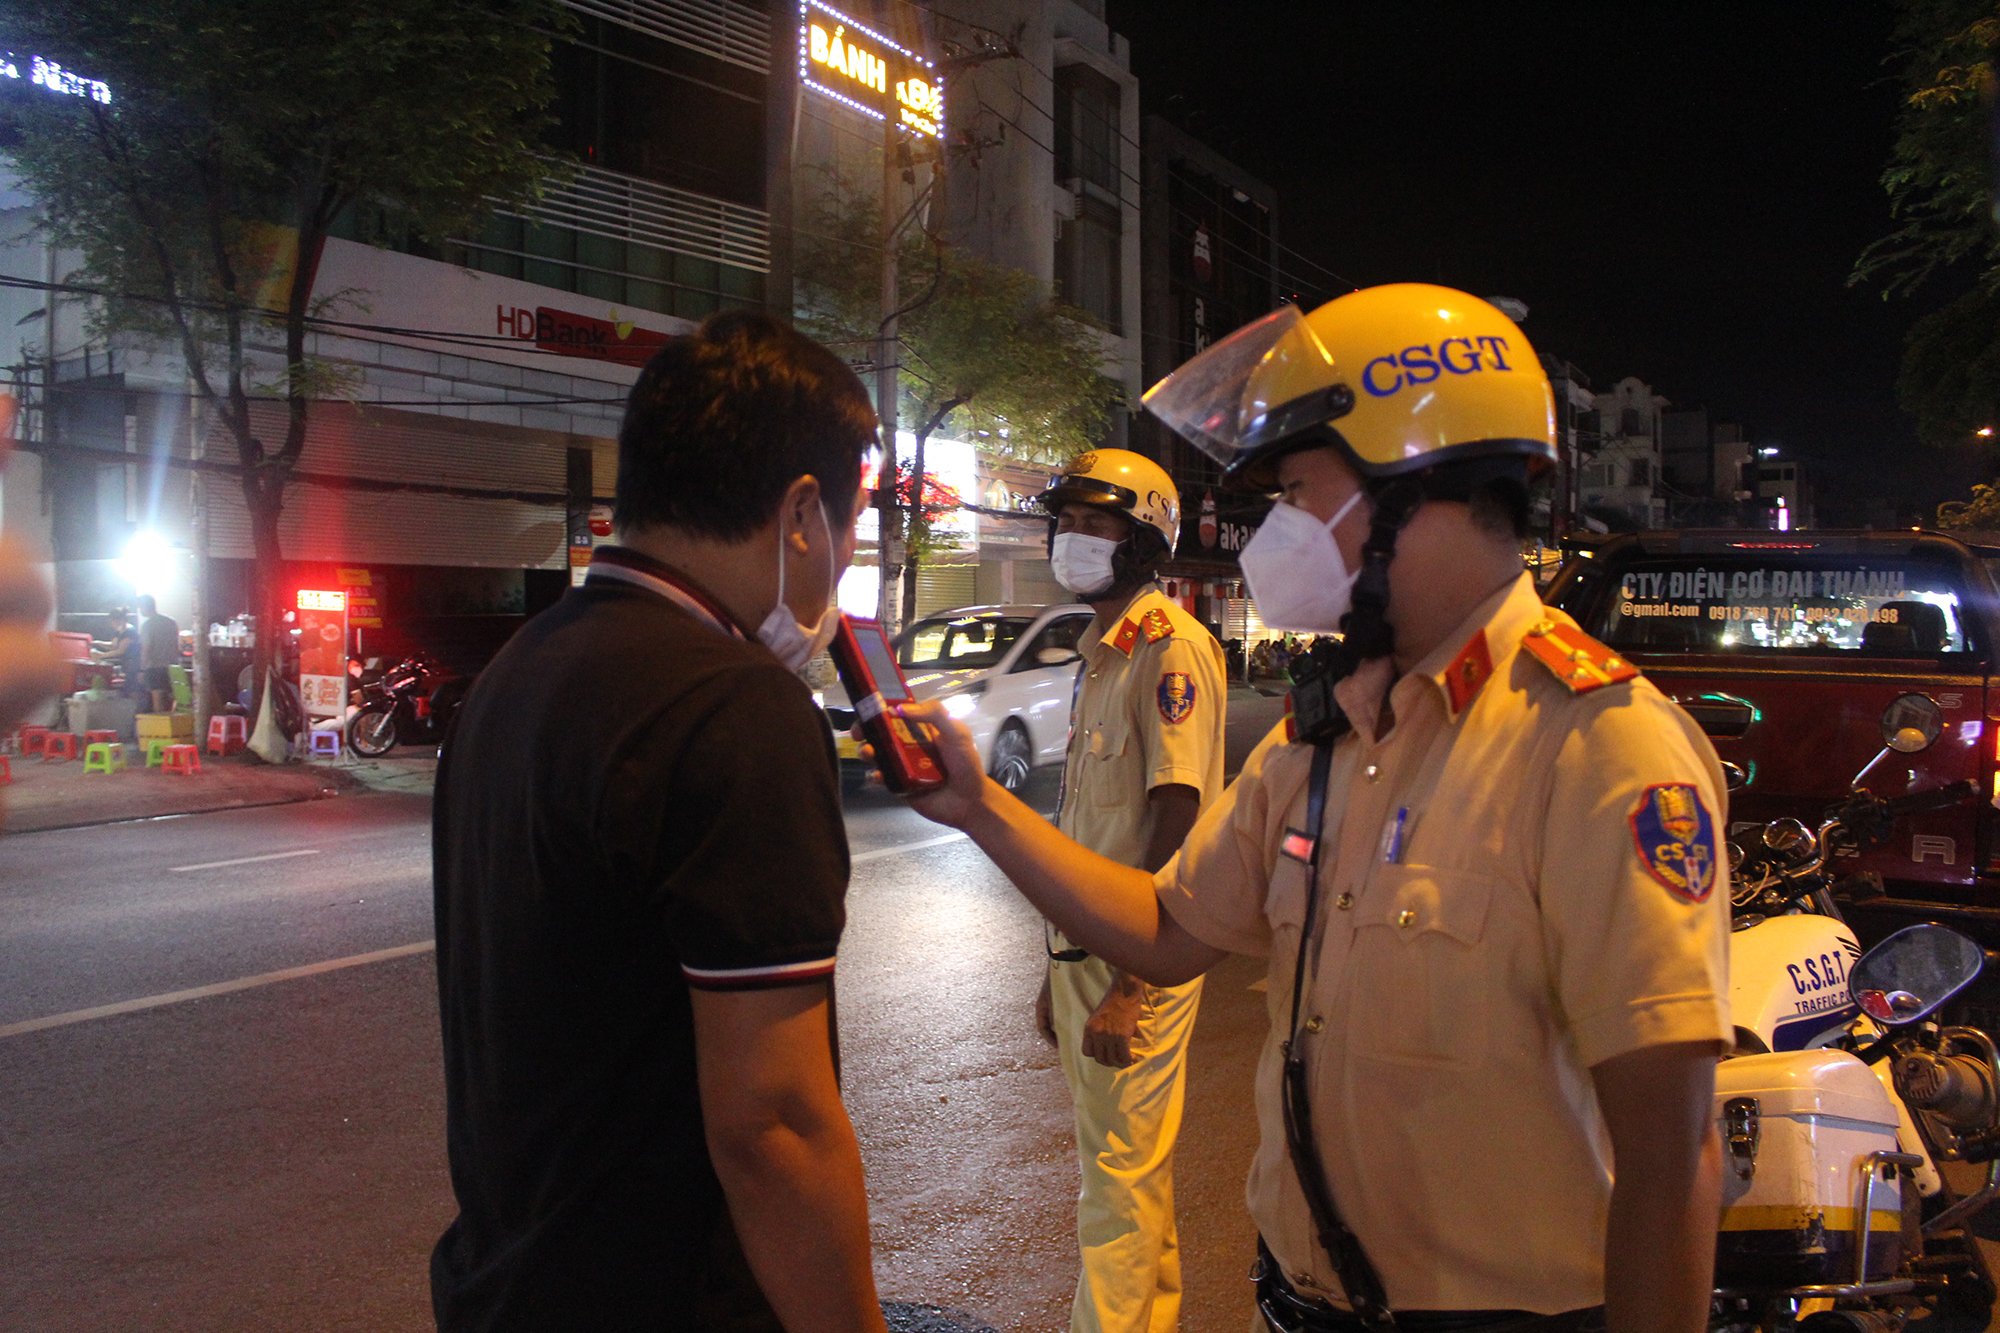 Ho Chi Minh City: Ma men drove a car to run away, asking two girls to intervene when they saw the traffic police - Photo 1.